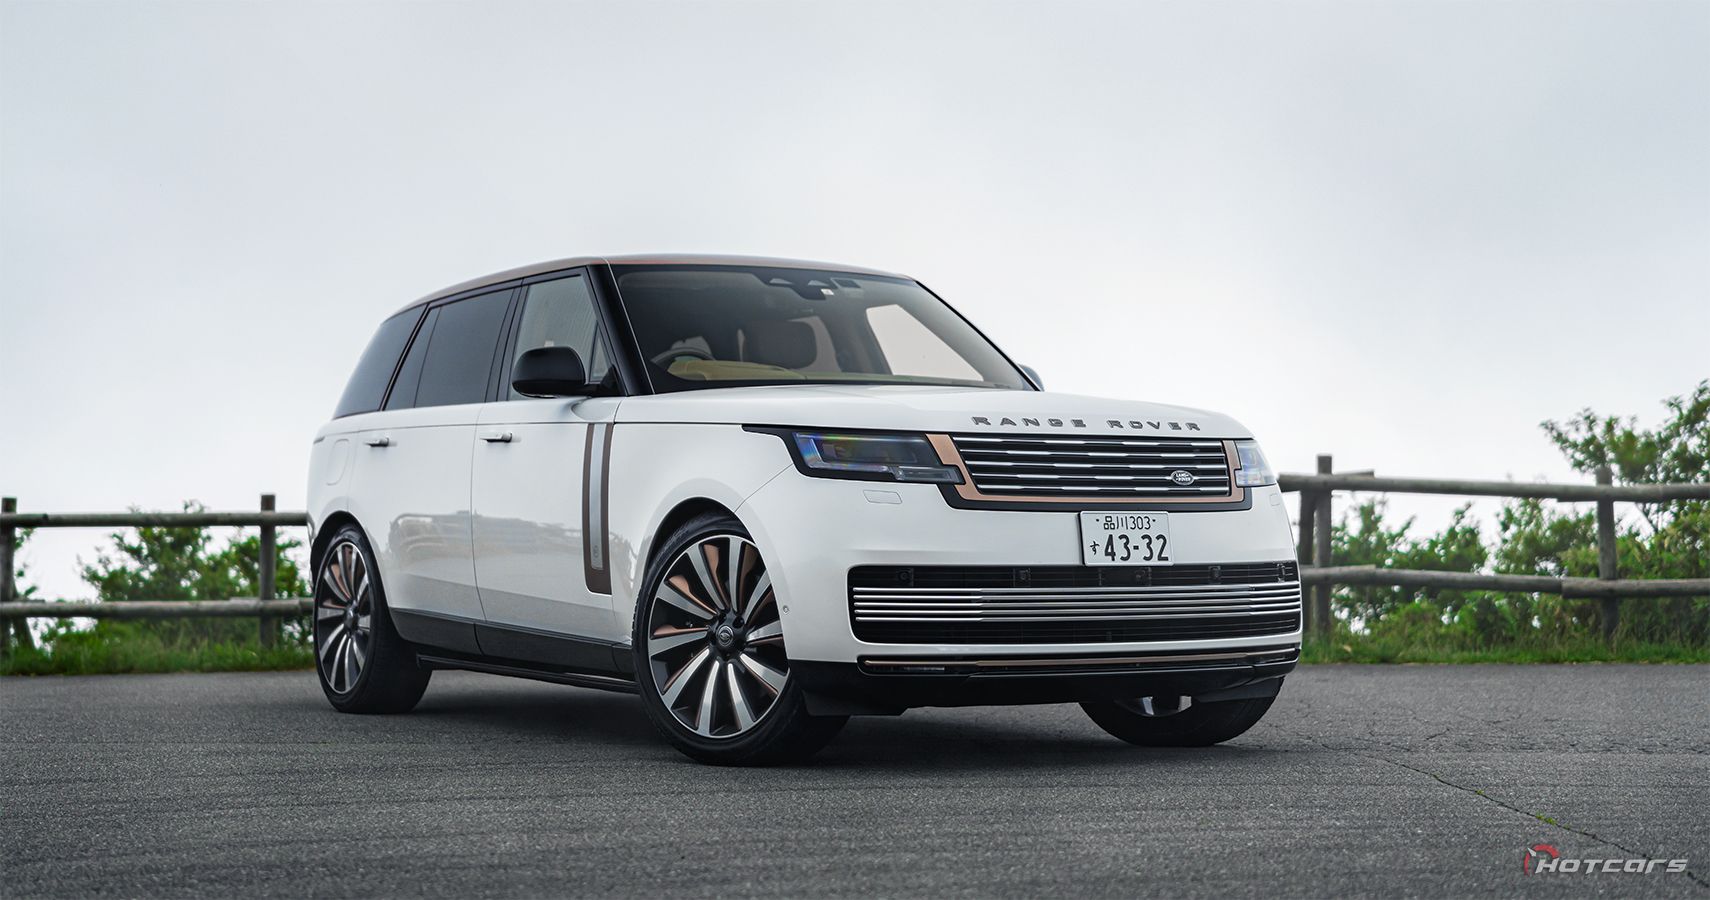 The New $345,000 Land Rover Range Rover SV Carmel Edition Is